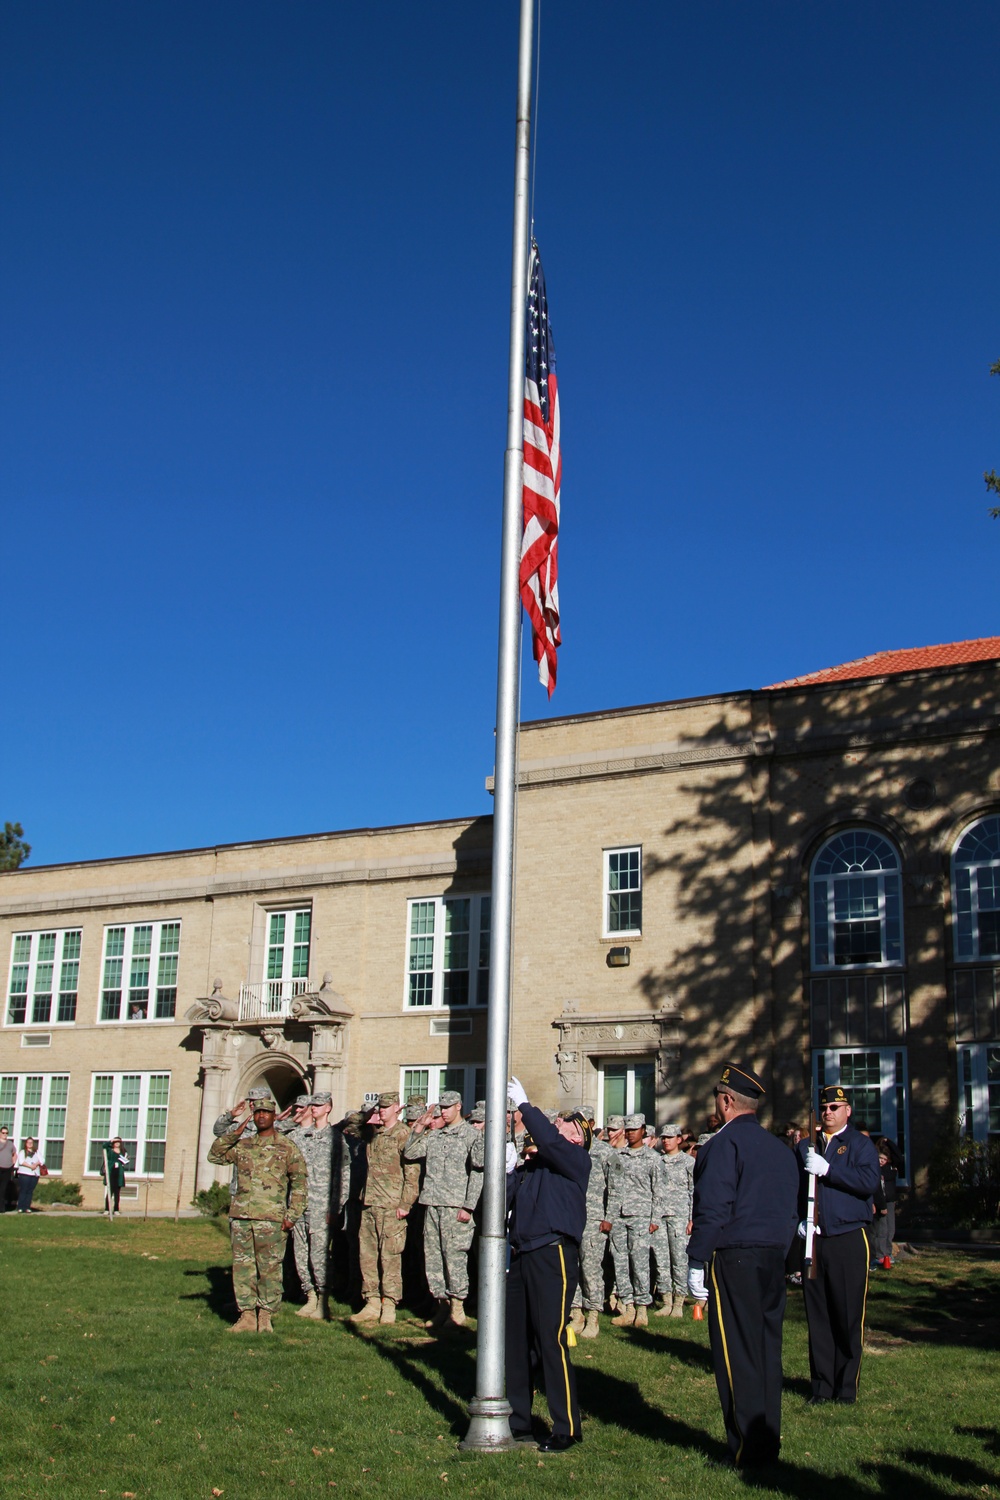 Students, Soldiers honor military veterans together